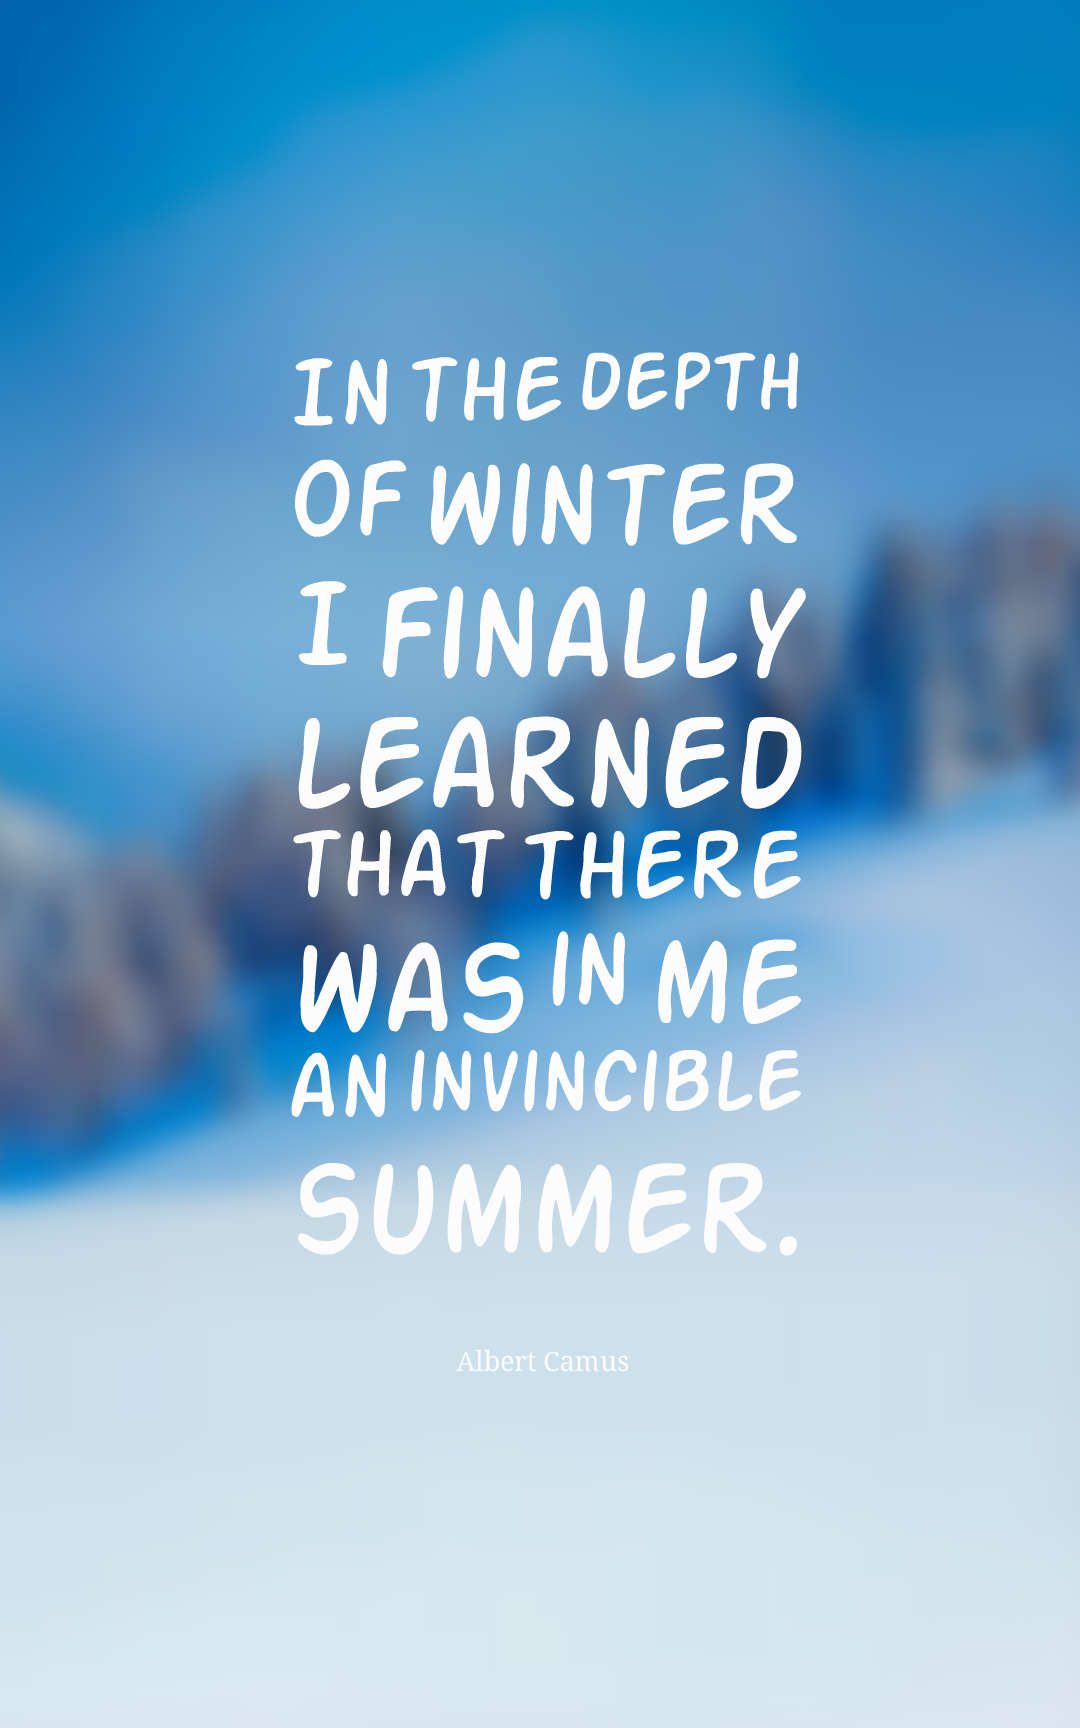 In the depth of winter I finally learned that there was in me an invincible summer.